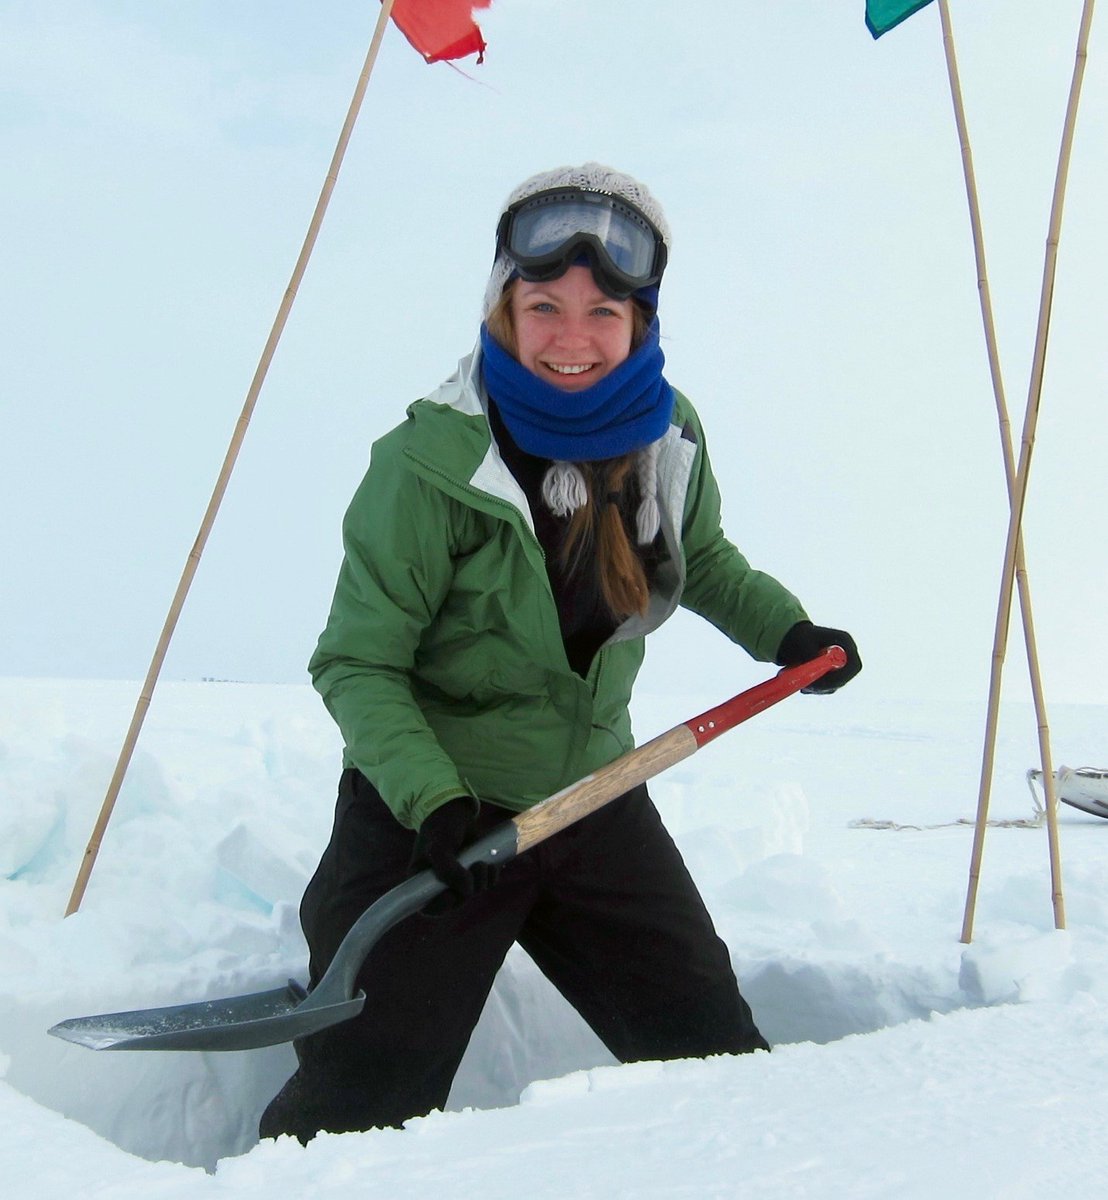 This is Morgan, one of our impressive #100polarwomen of the week. She works in both research and the polar science-policy nexus, with a strong focus on gender and climate. Check out what she has to say on our website: womeninpolarscience.org/100polarwomen/